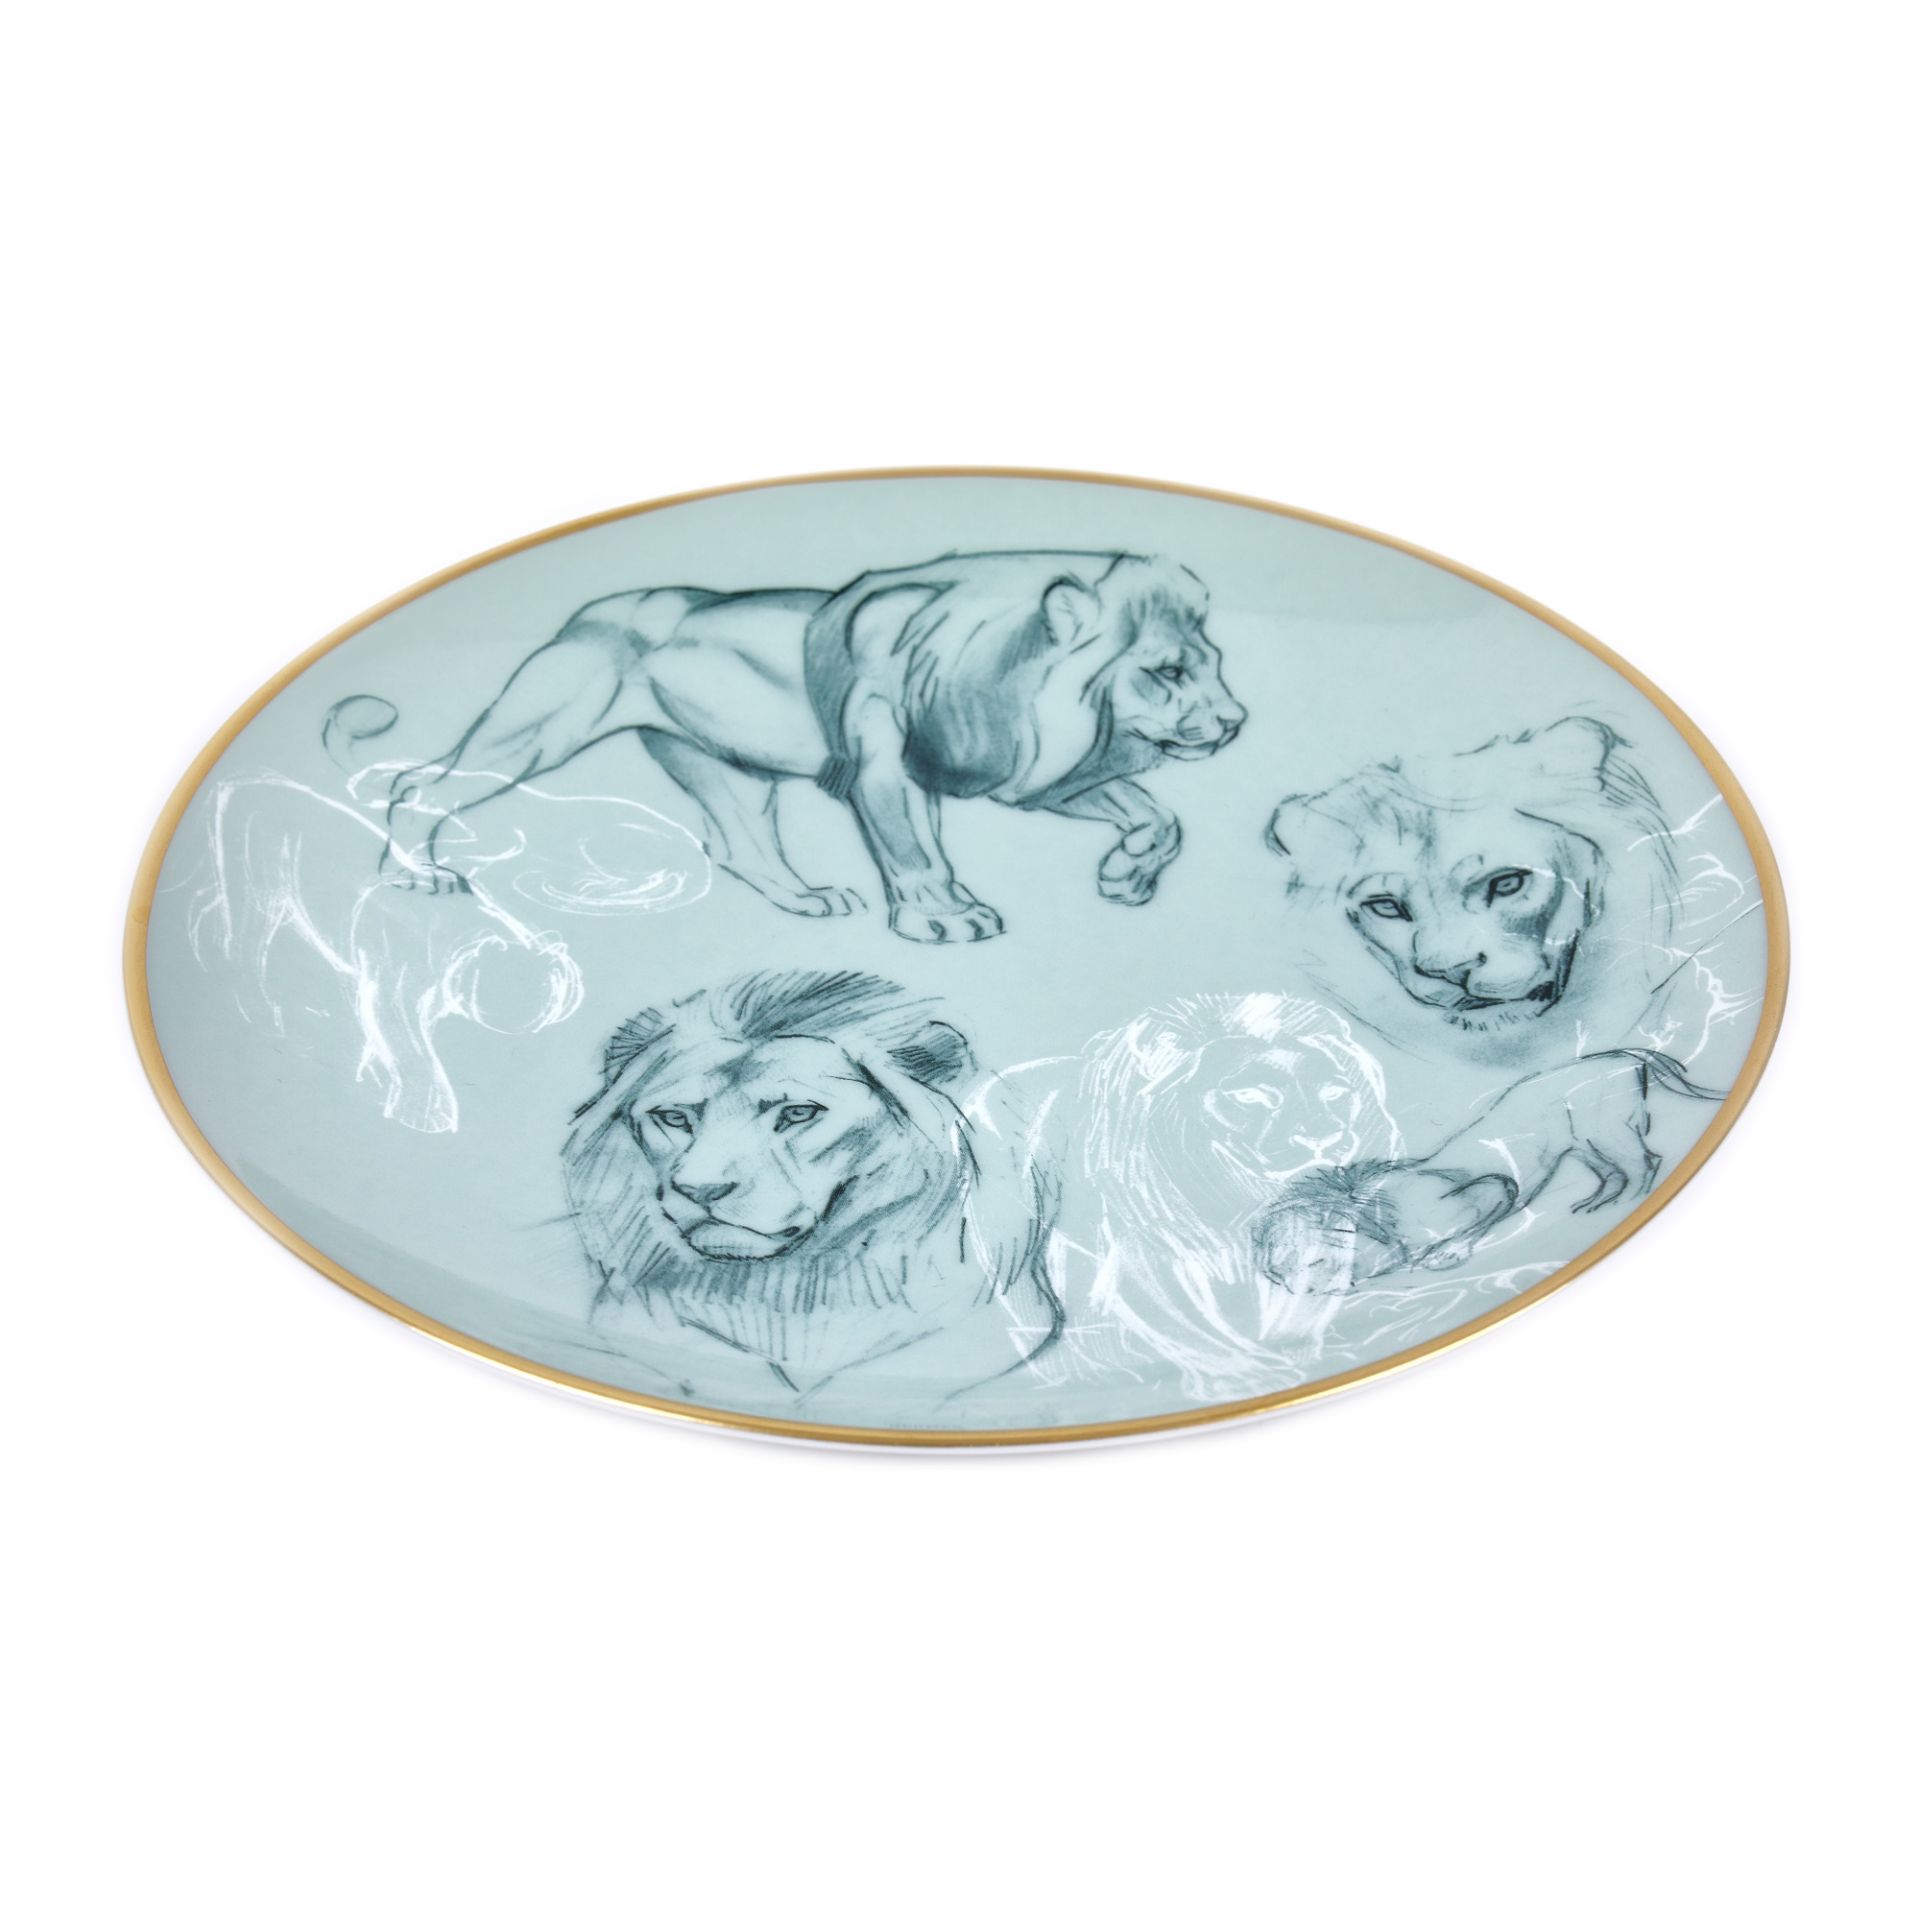 Hermès porcelain set, consisting of two plates, from the collection "Carnets d'Equateur", original b - Image 5 of 5